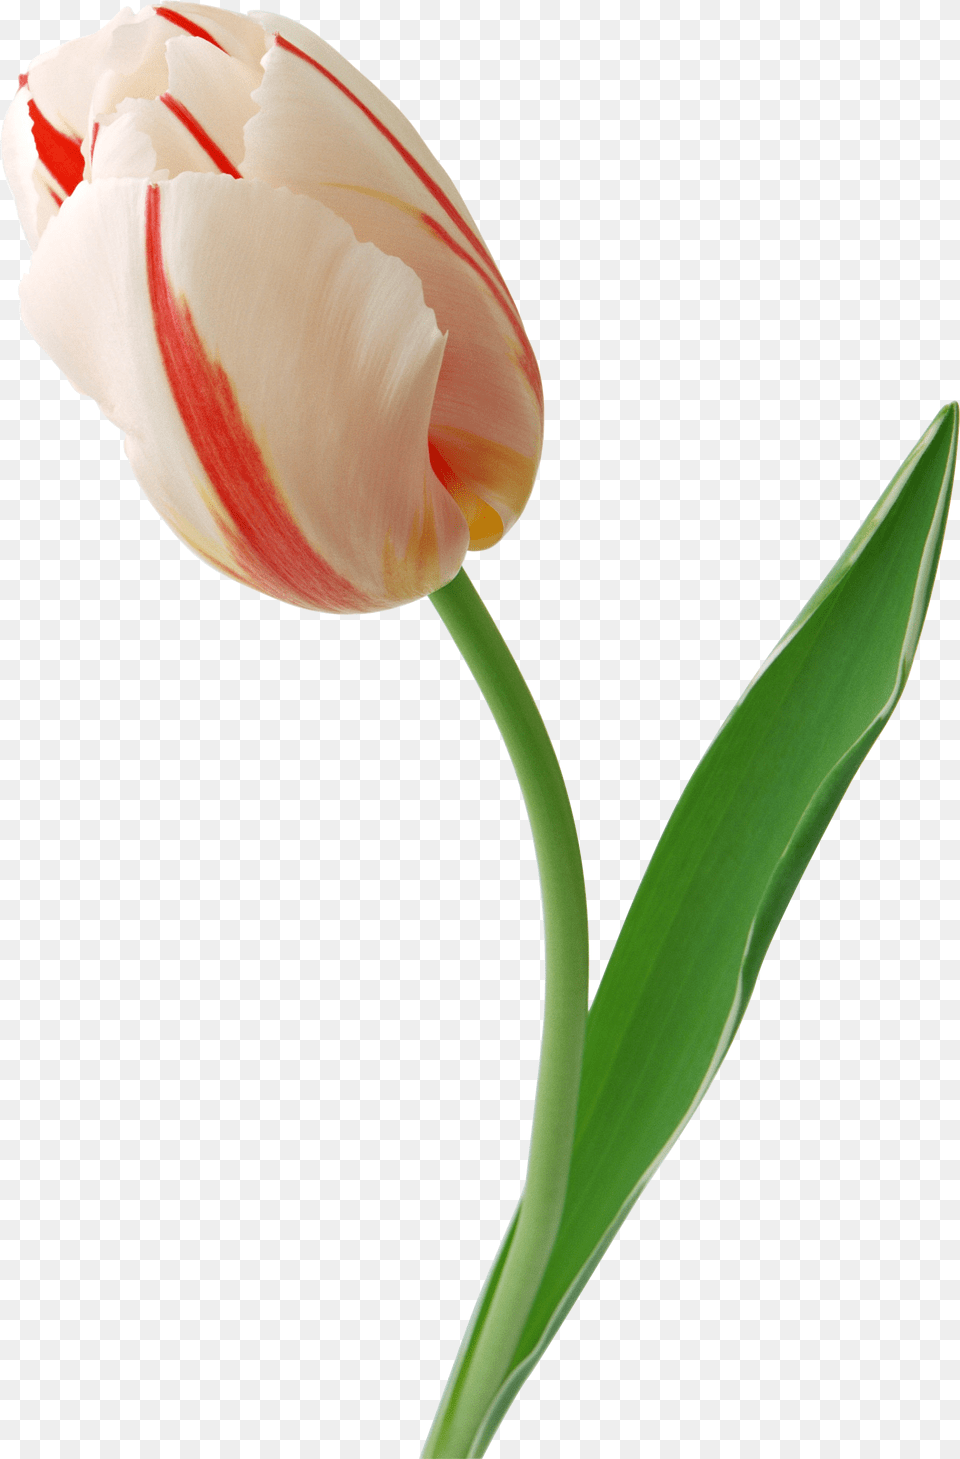 Now You Can Download Tulip In, Flower, Plant, Rose Png Image